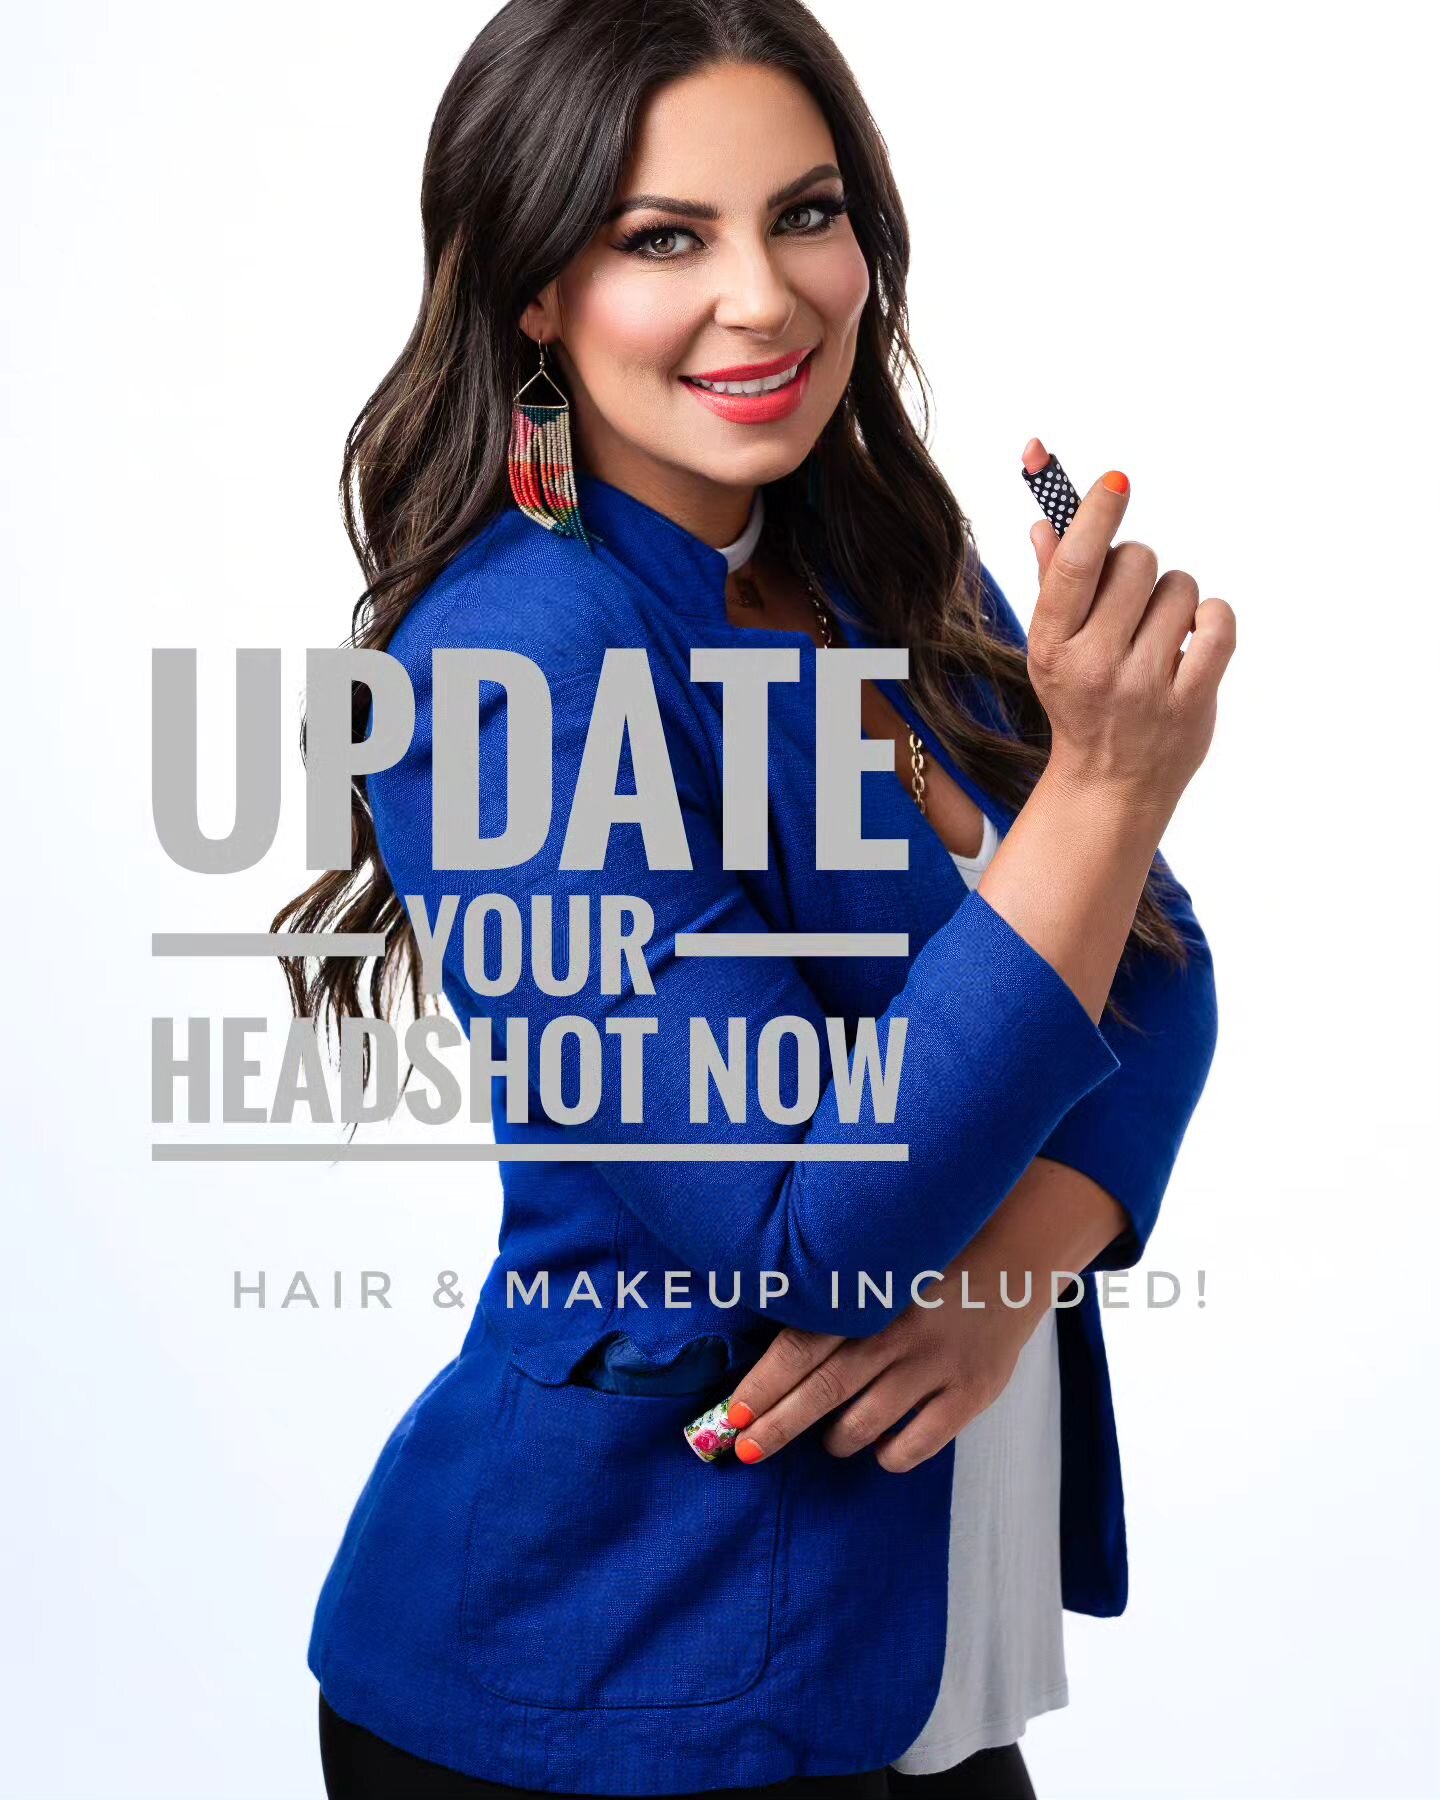 What!? @danismithmua will be with me at the new studio all day on April 5th to make sure you look amazing for your headshot.  Only 5 spots open, don't miss yours! 

Such a great opportunity to update your headshot for 2024, I can't wait to see you!

